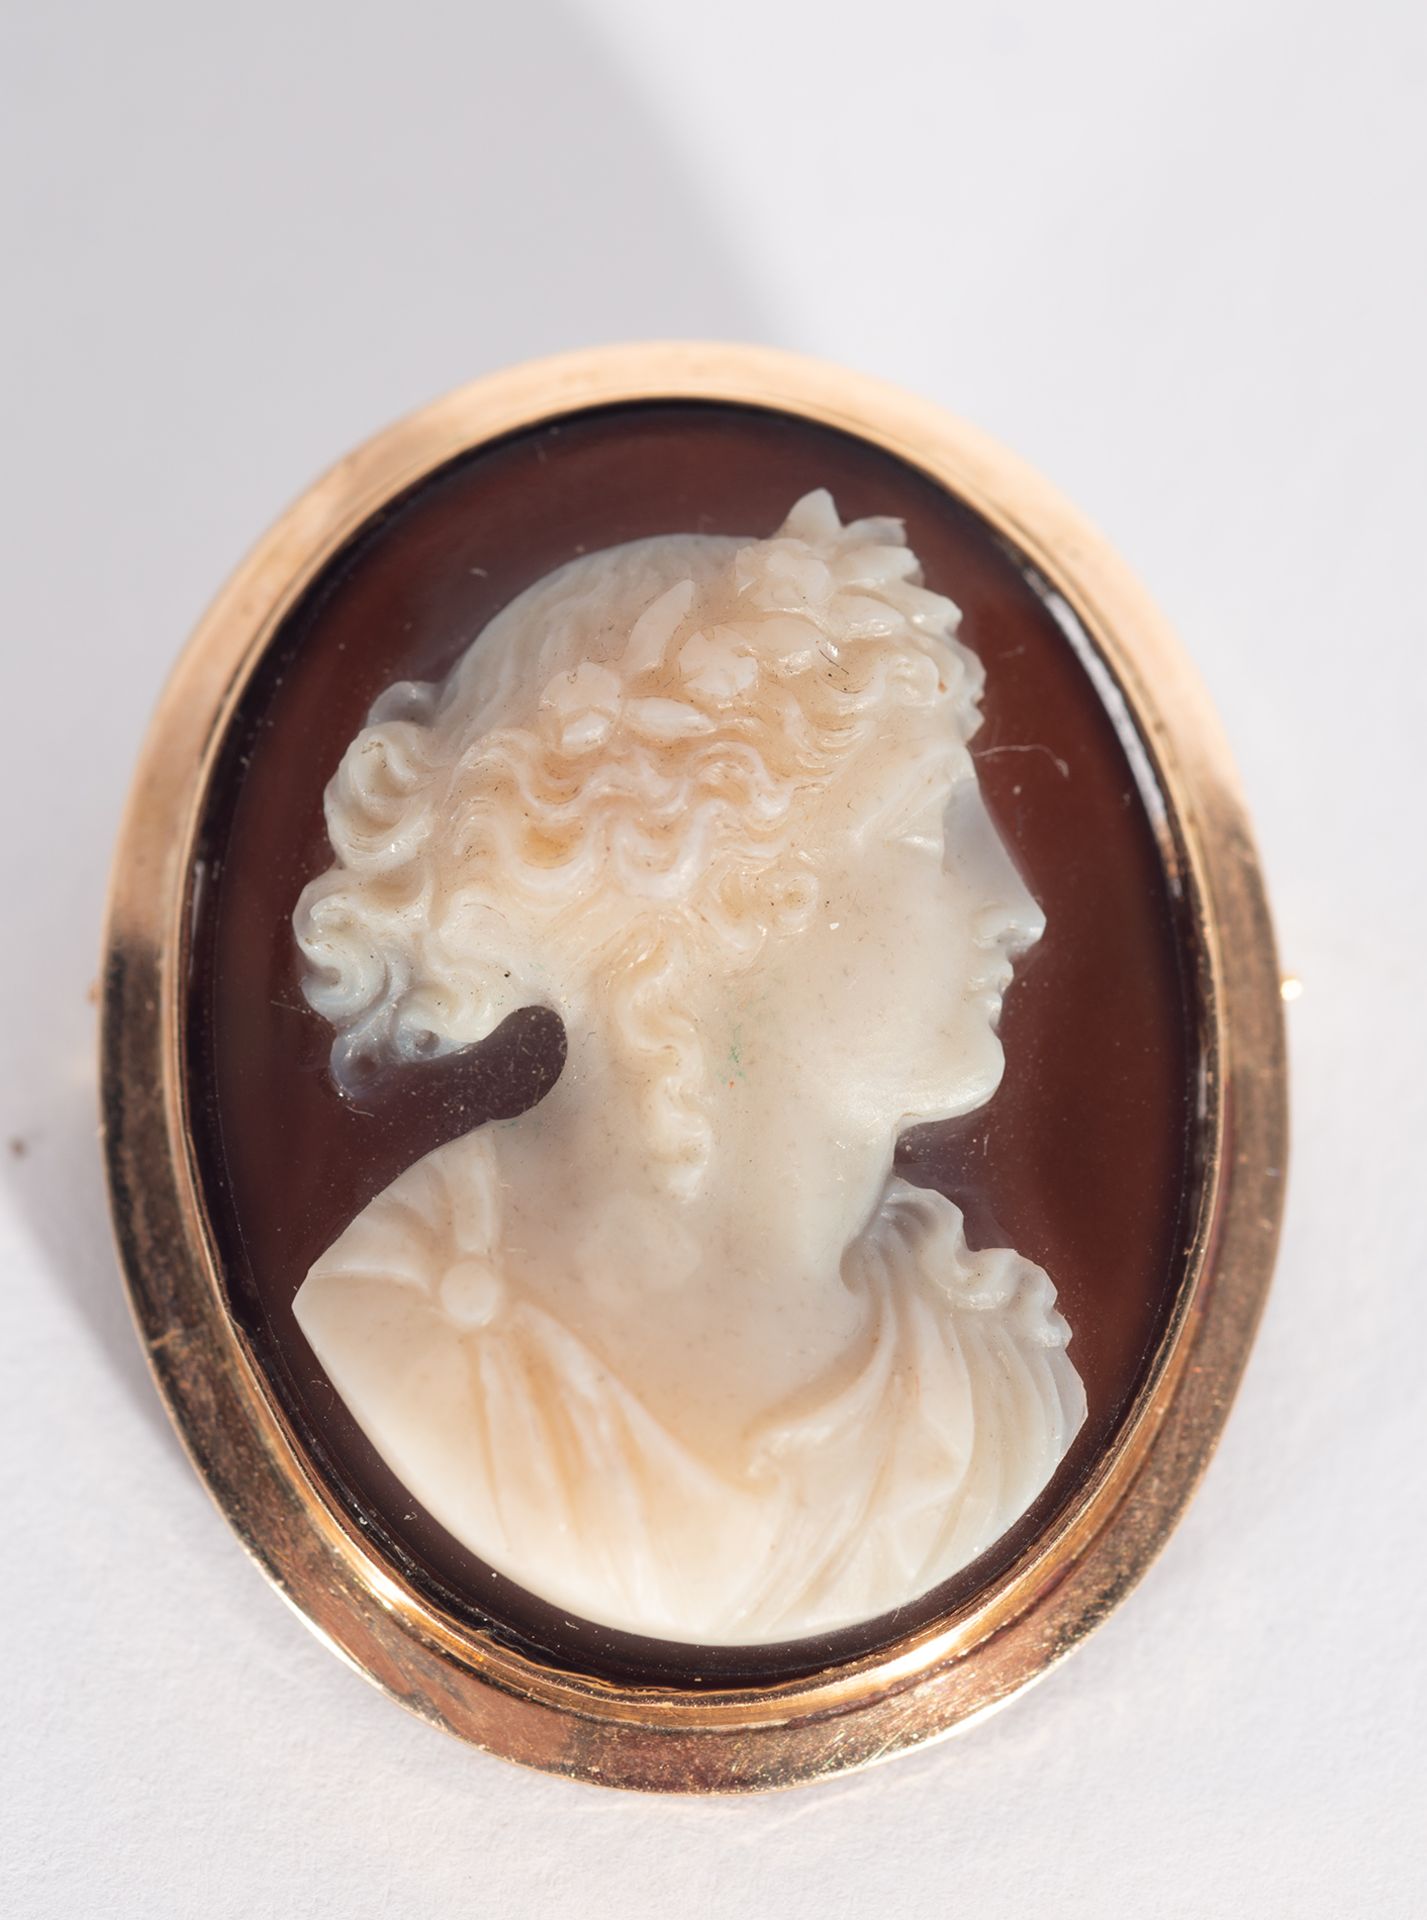 Gold brooch with Lady's Cameo, 19th century - Image 2 of 2